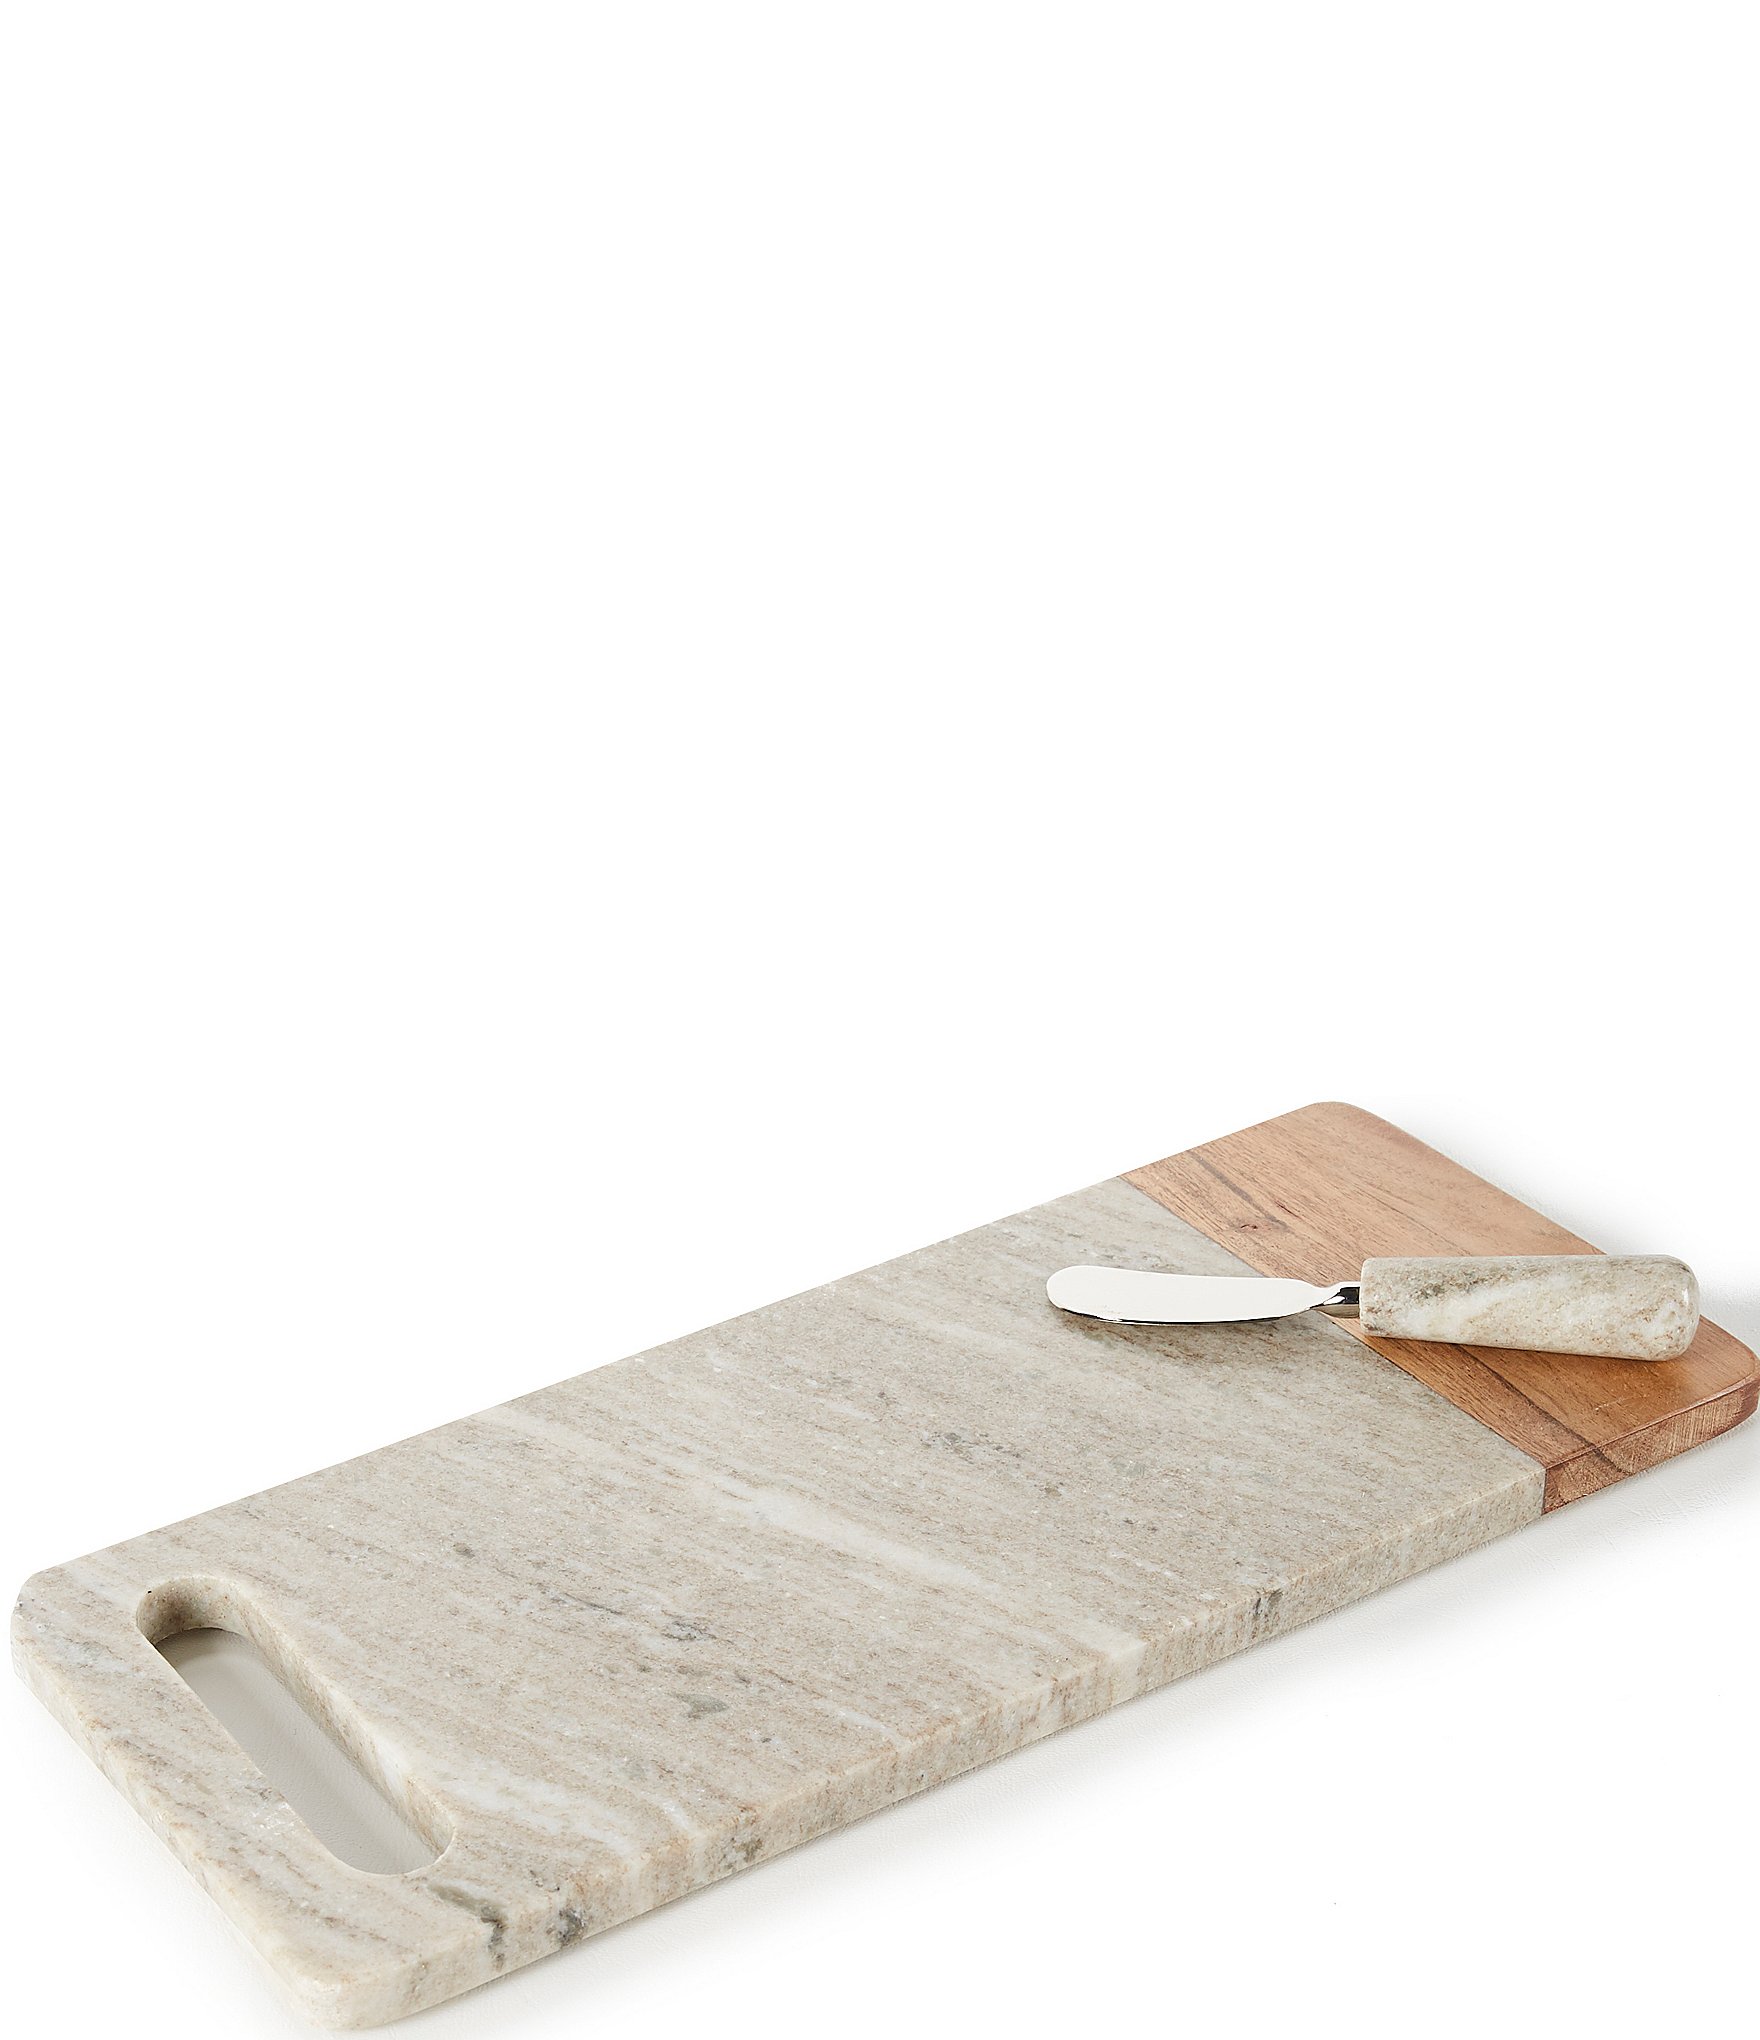 https://dimg.dillards.com/is/image/DillardsZoom/zoom/southern-living-white-marble-handle-cheese-board-with-knife/00000000_zi_cdbdb03e-6b30-4255-ab16-6bc59d6bf66e.jpg